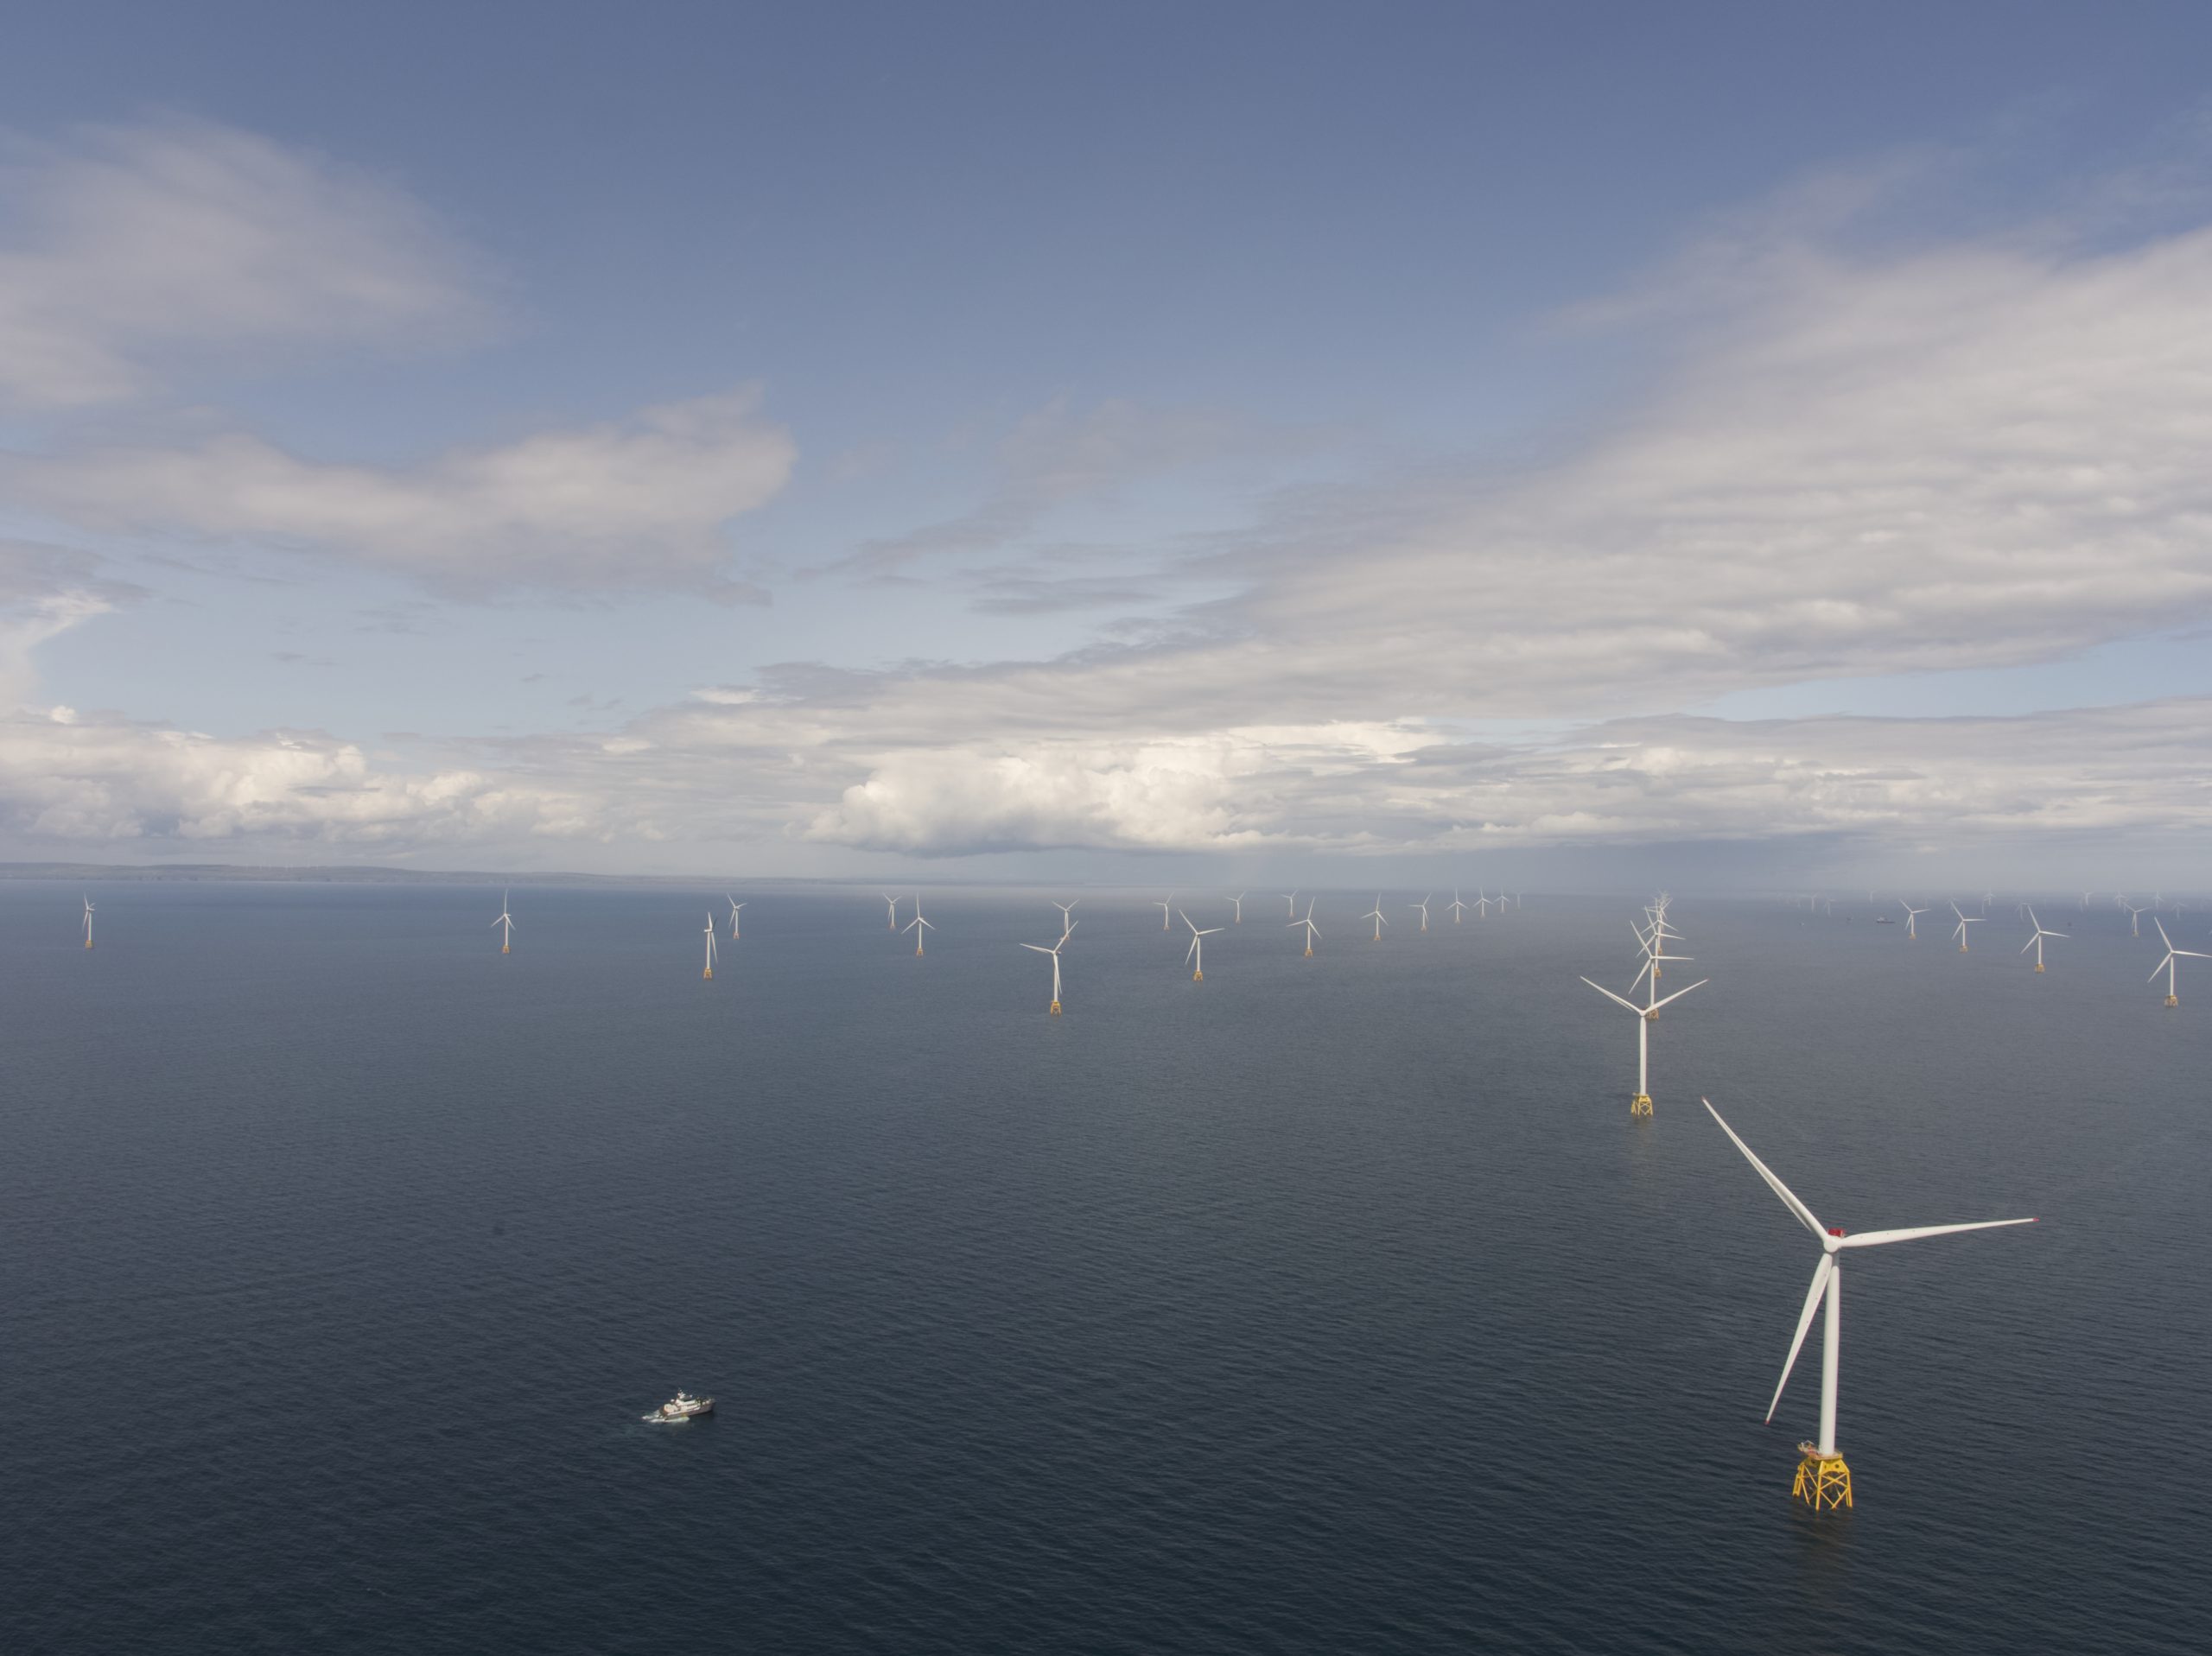 The Beatrice windfarm, operated by SSE Renewables, off the coast of Scotland